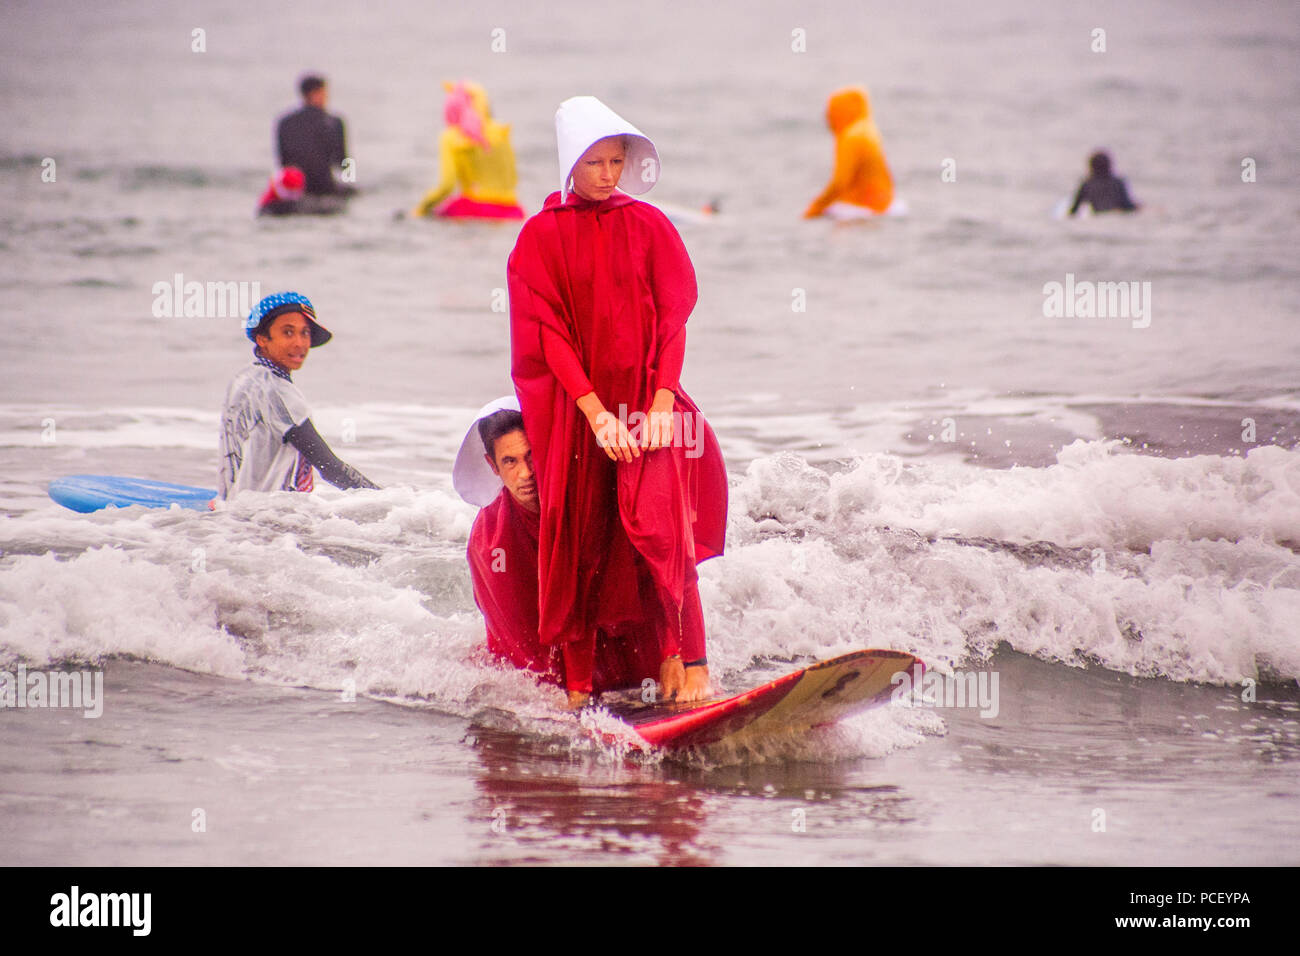 In costumes from 'The Handmaid's Tale,' two surfers join in a Halloween costumed surfing event in Huntington Beach, CA.  (Photo by Spencer Grant) Stock Photo